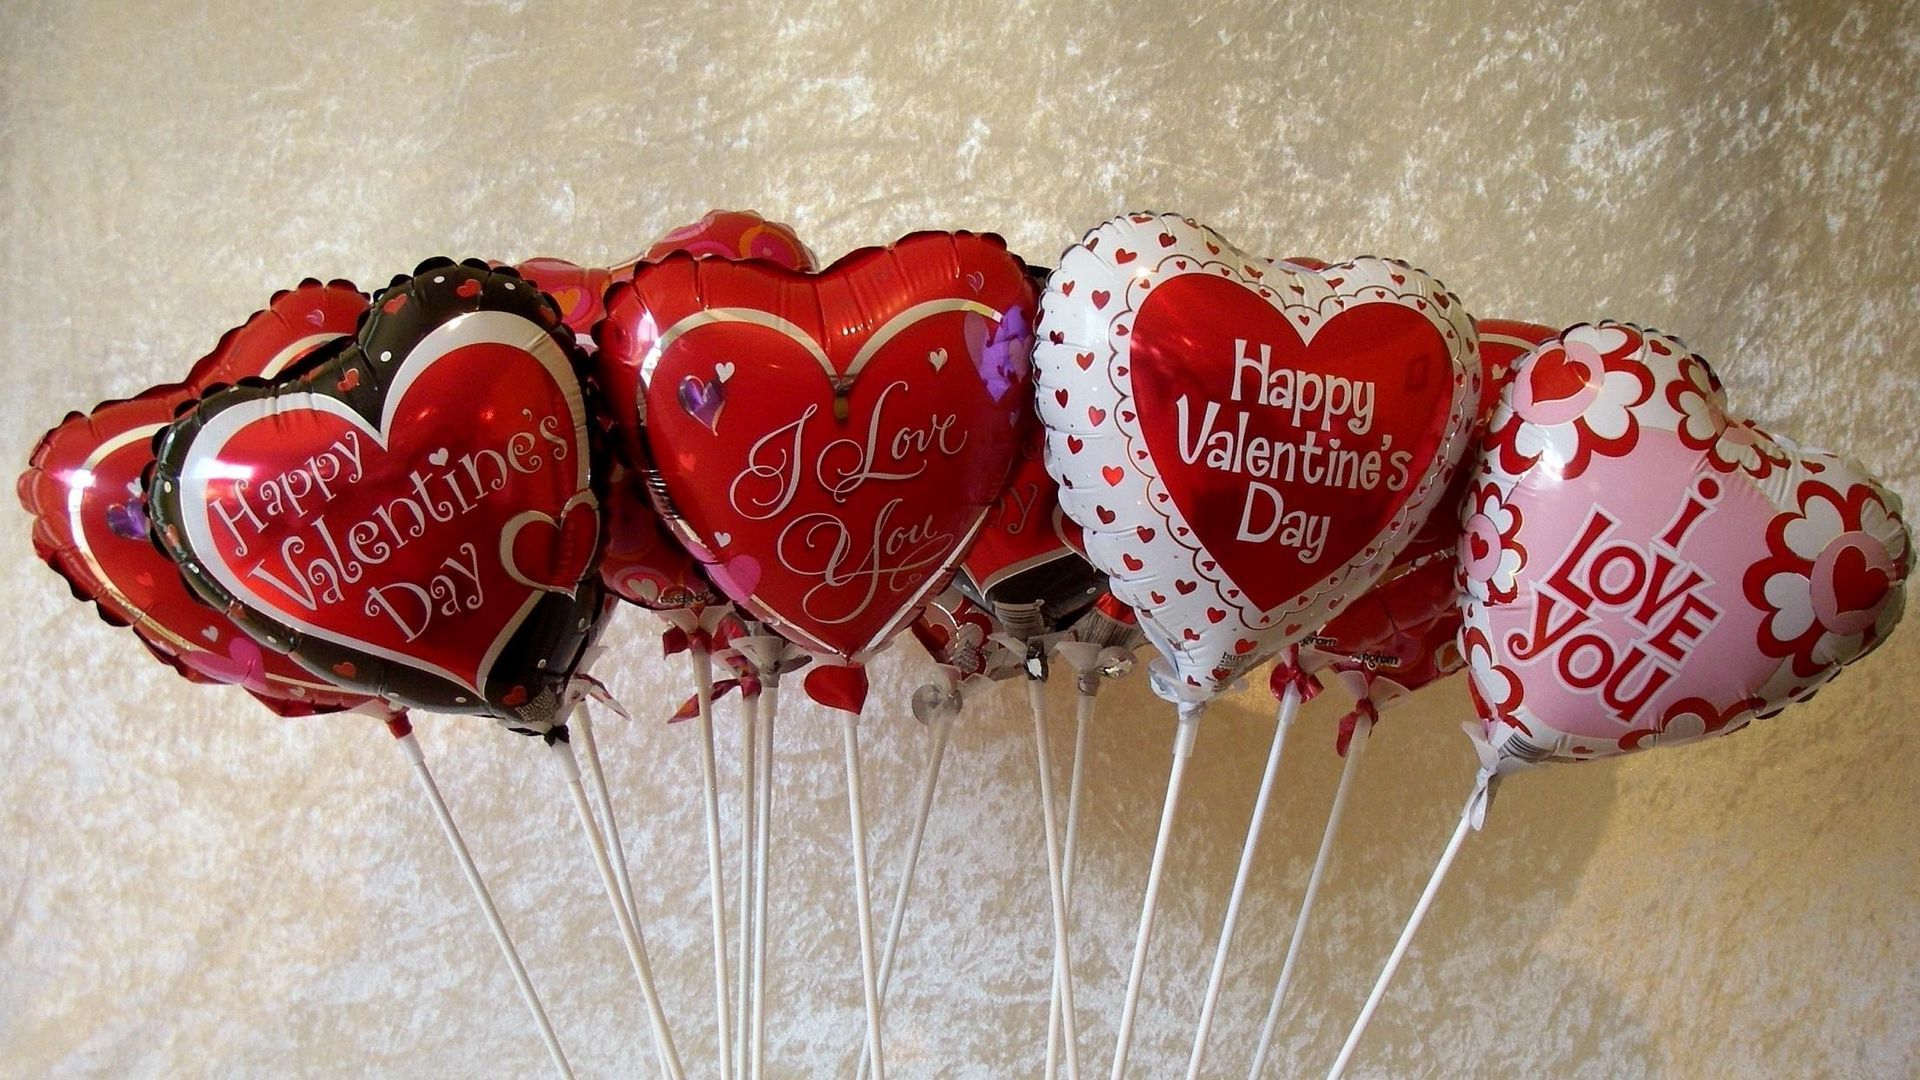 Download wallpaper 1920x1080 valentines day, hearts, balloons, signs, many full hd, hdtv, fhd, 1080p HD background